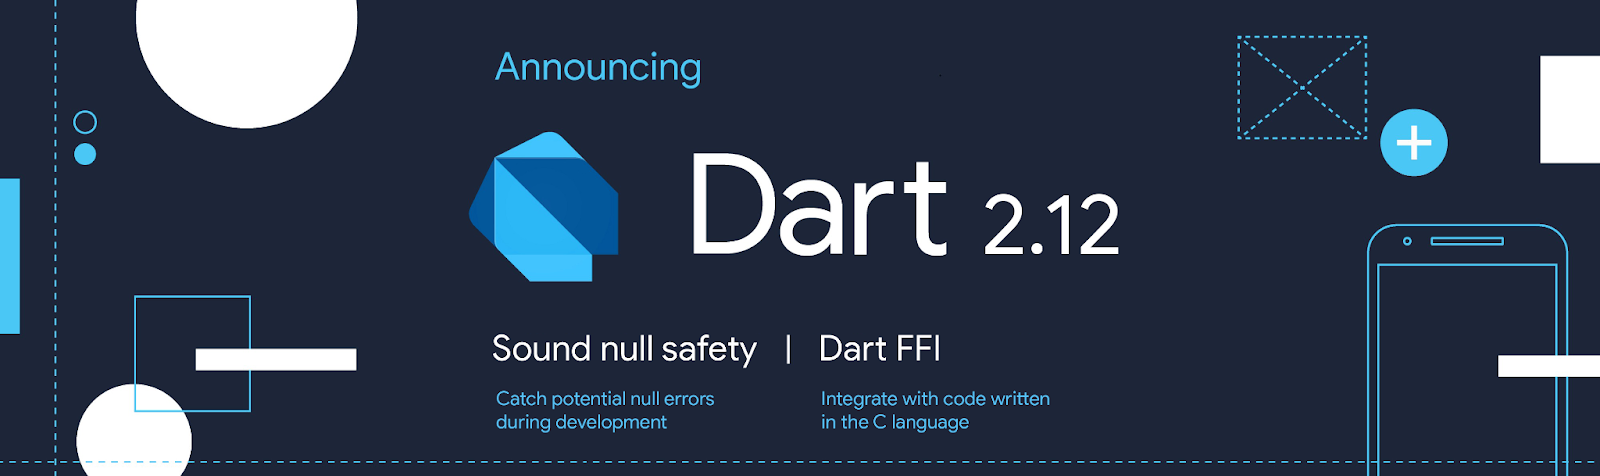 Spain Earth impulse Announcing Dart 2.12. Sound null safety and Dart FFI ship to… | by Michael  Thomsen | Dart | Medium